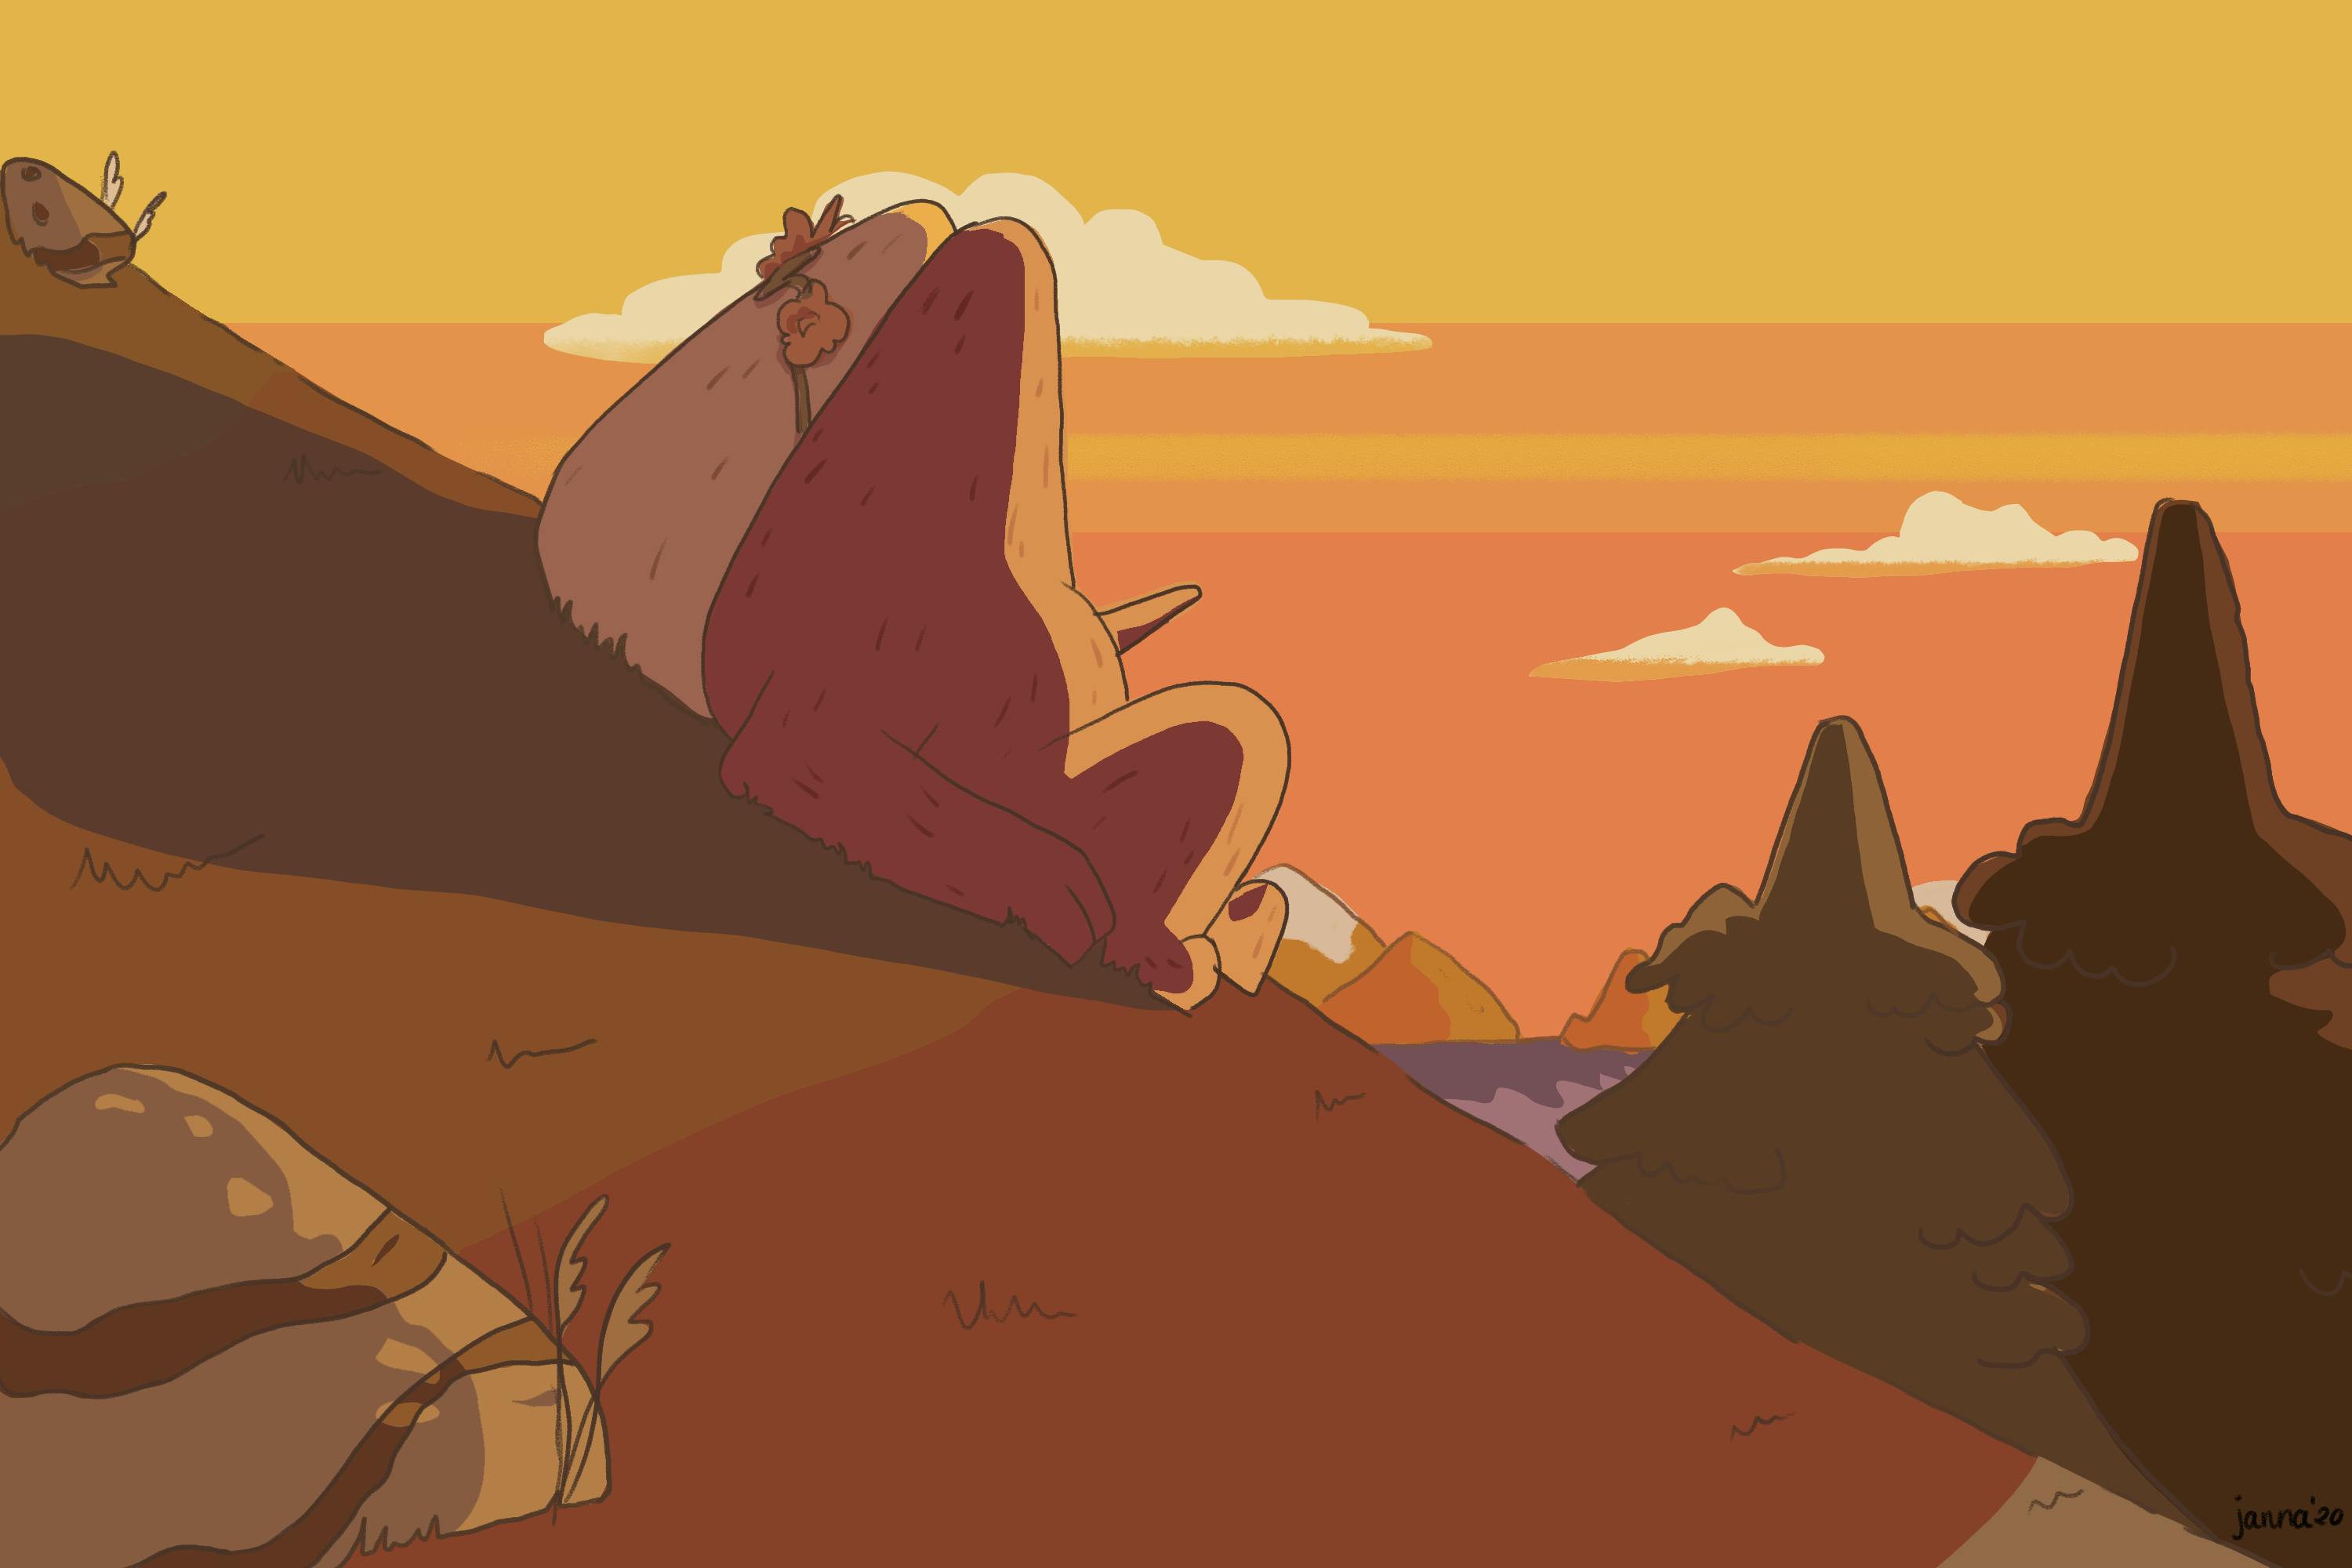 Illustration of two lumpy characters on a hill